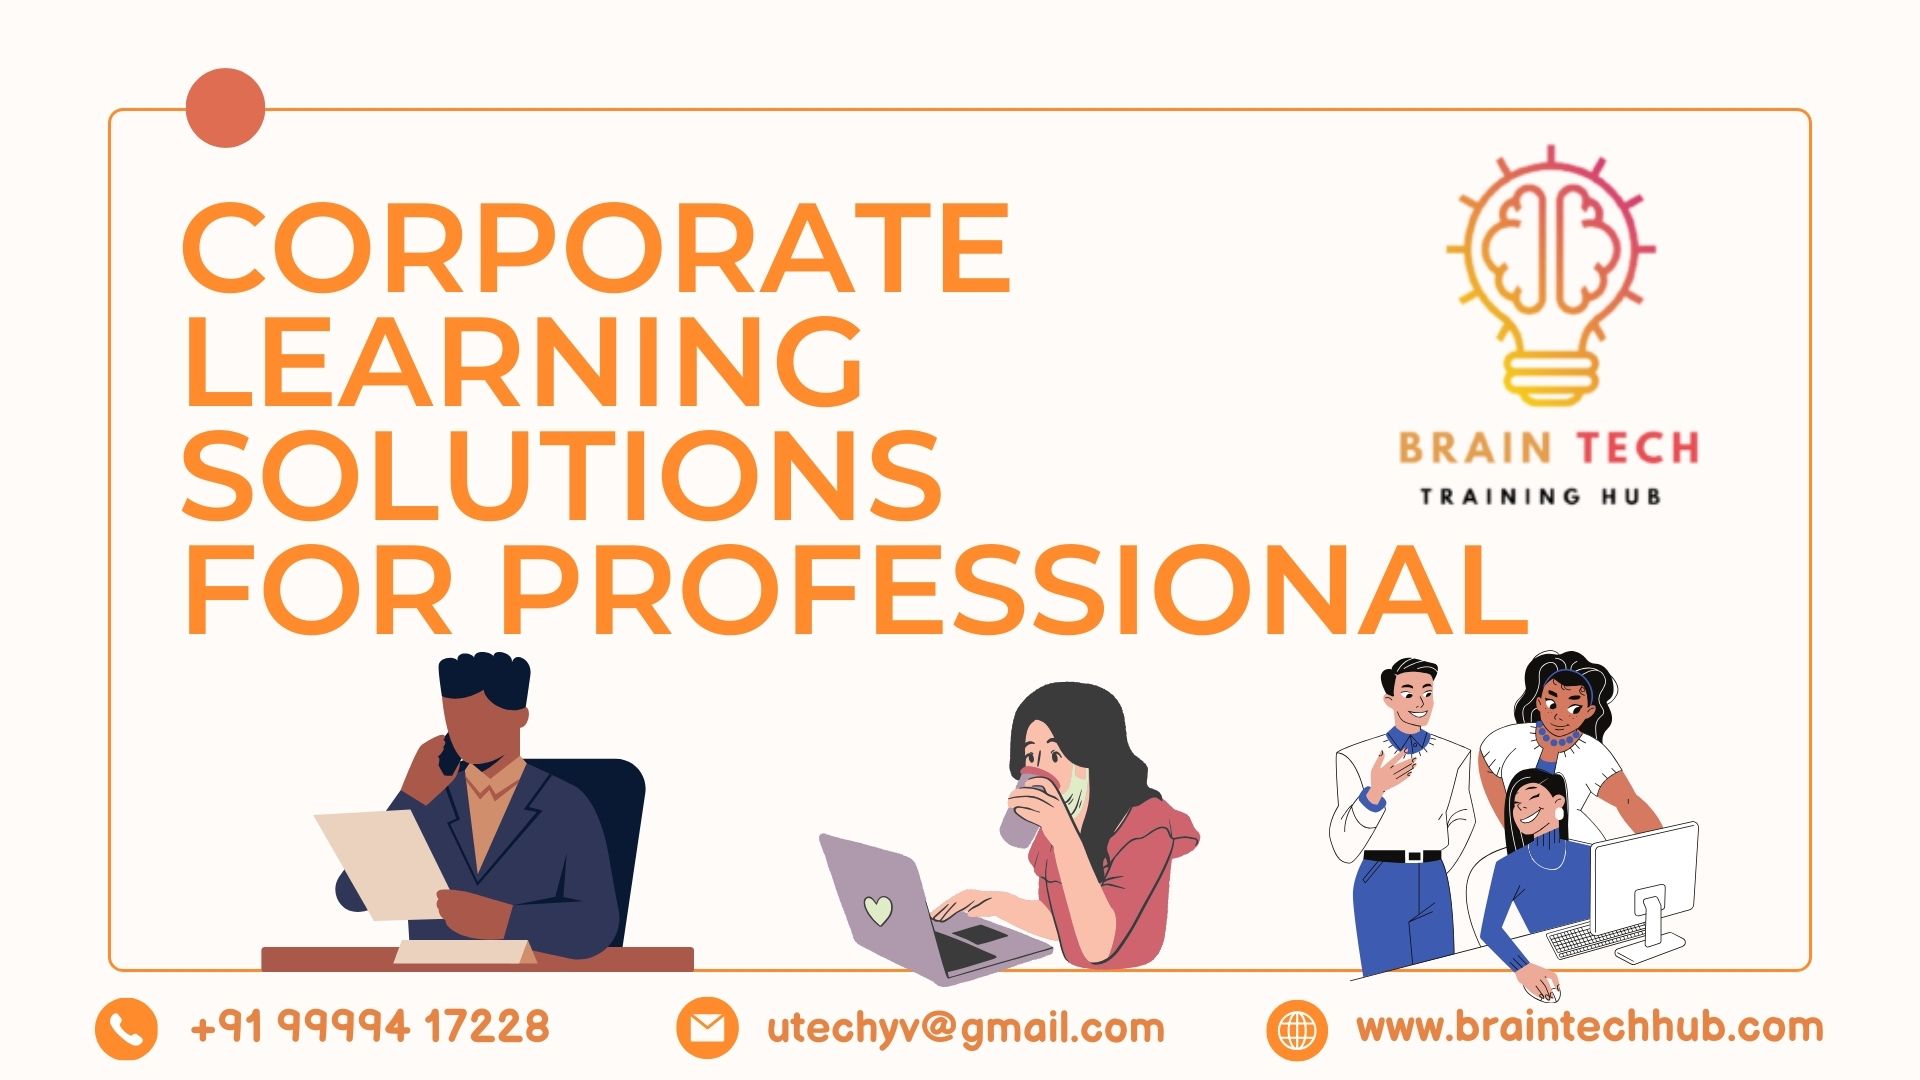 Corporate Learning Solutions for Professional